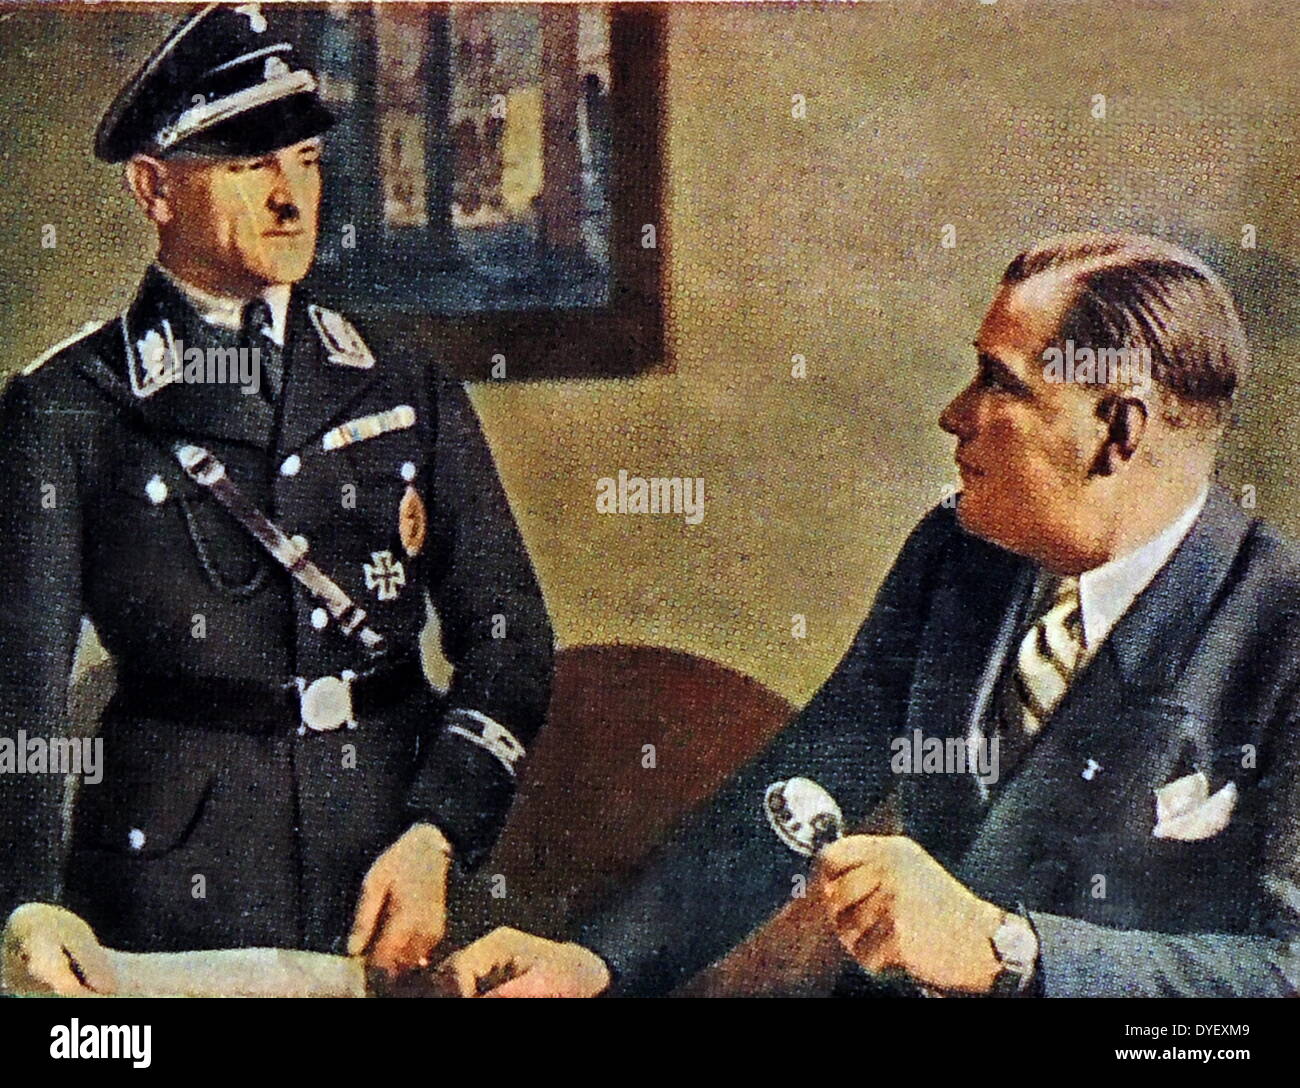 Wilhelm Brückner (Right seated) 1884 - 1954 was until 1940 Adolf Hitler's chief adjutant. Left standing is Josef 'Sepp' Dietrich 1892 – 1966) German Waffen-SS General and a member of the Nazi Party of Nazi Germany. Prior to 1929, he was Adolf Hitler's chauffeur and bodyguard but received rapid promotion after his participation in the murder of Hitler's political opponents during the Night of the Long Knives. Stock Photo